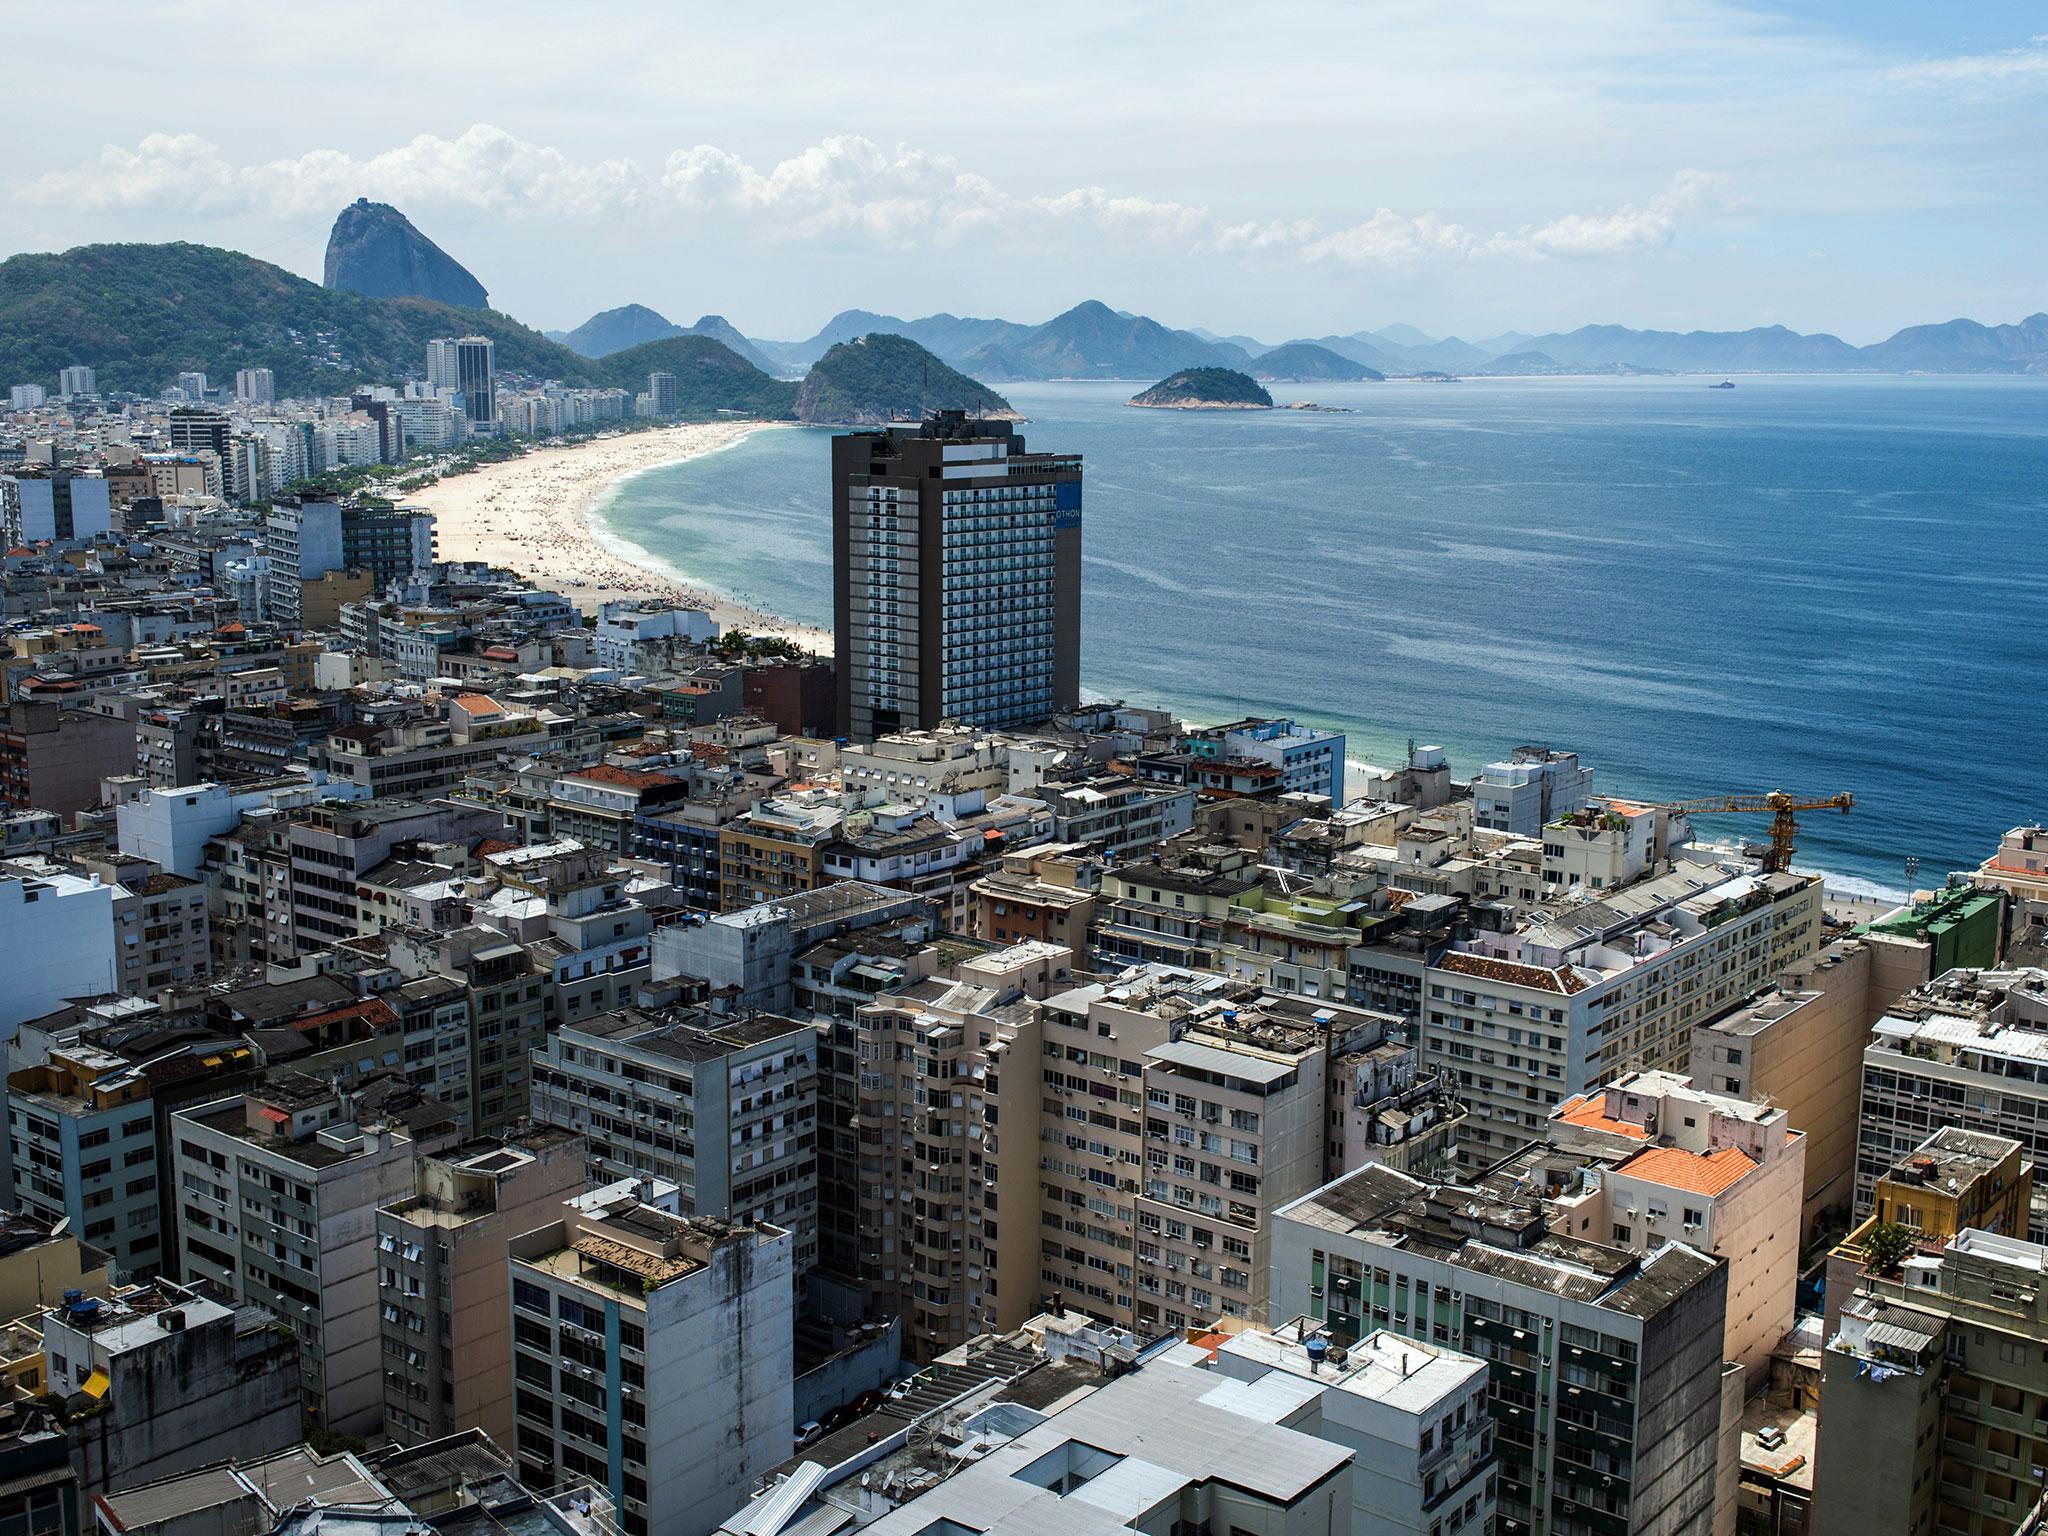 It's possible to find flights to Rio for just over £1,000 return